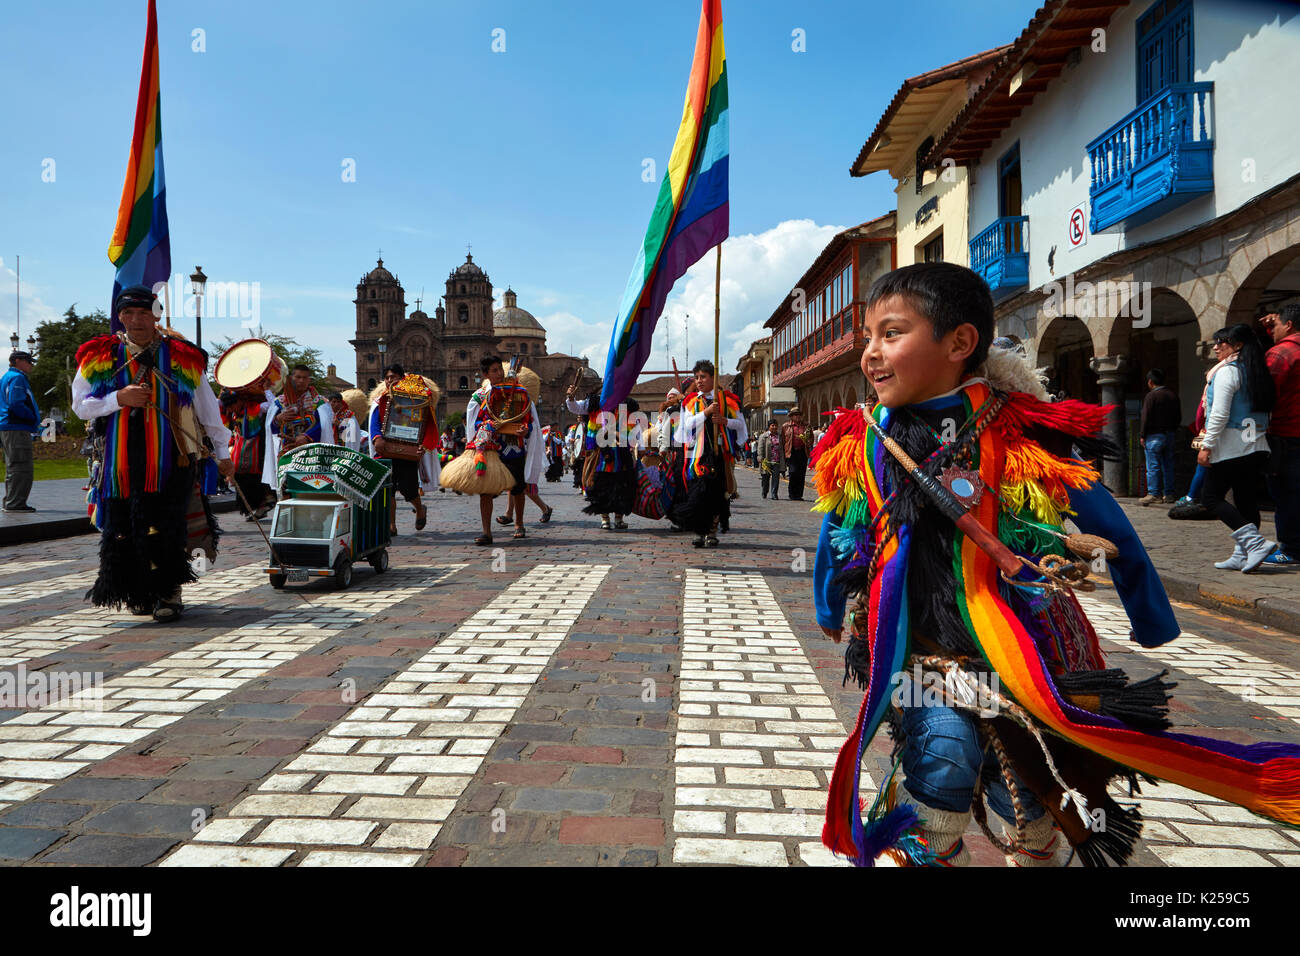 Small boy in indigenous costume in parade, and rainbow flags of Cusco, Plaza de Armas, Cusco, Peru, South America Stock Photo